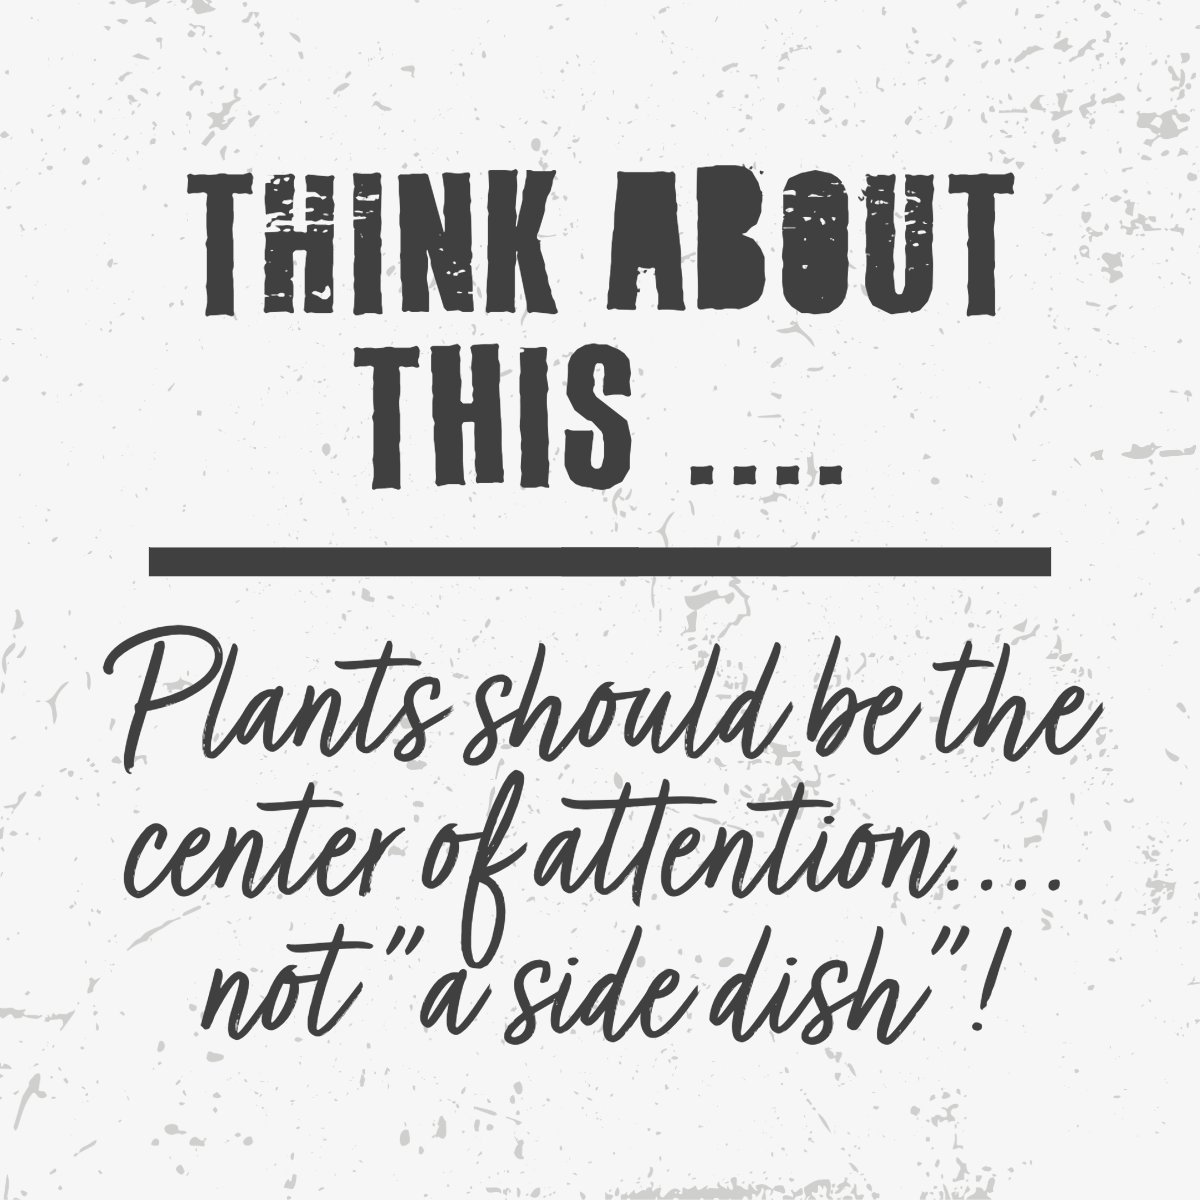 Make plants the star of the show by creating your dishes around the plant being the main part of your meal. #GoVegan #PlantBasedNutritionForLife #centerofattention #plants